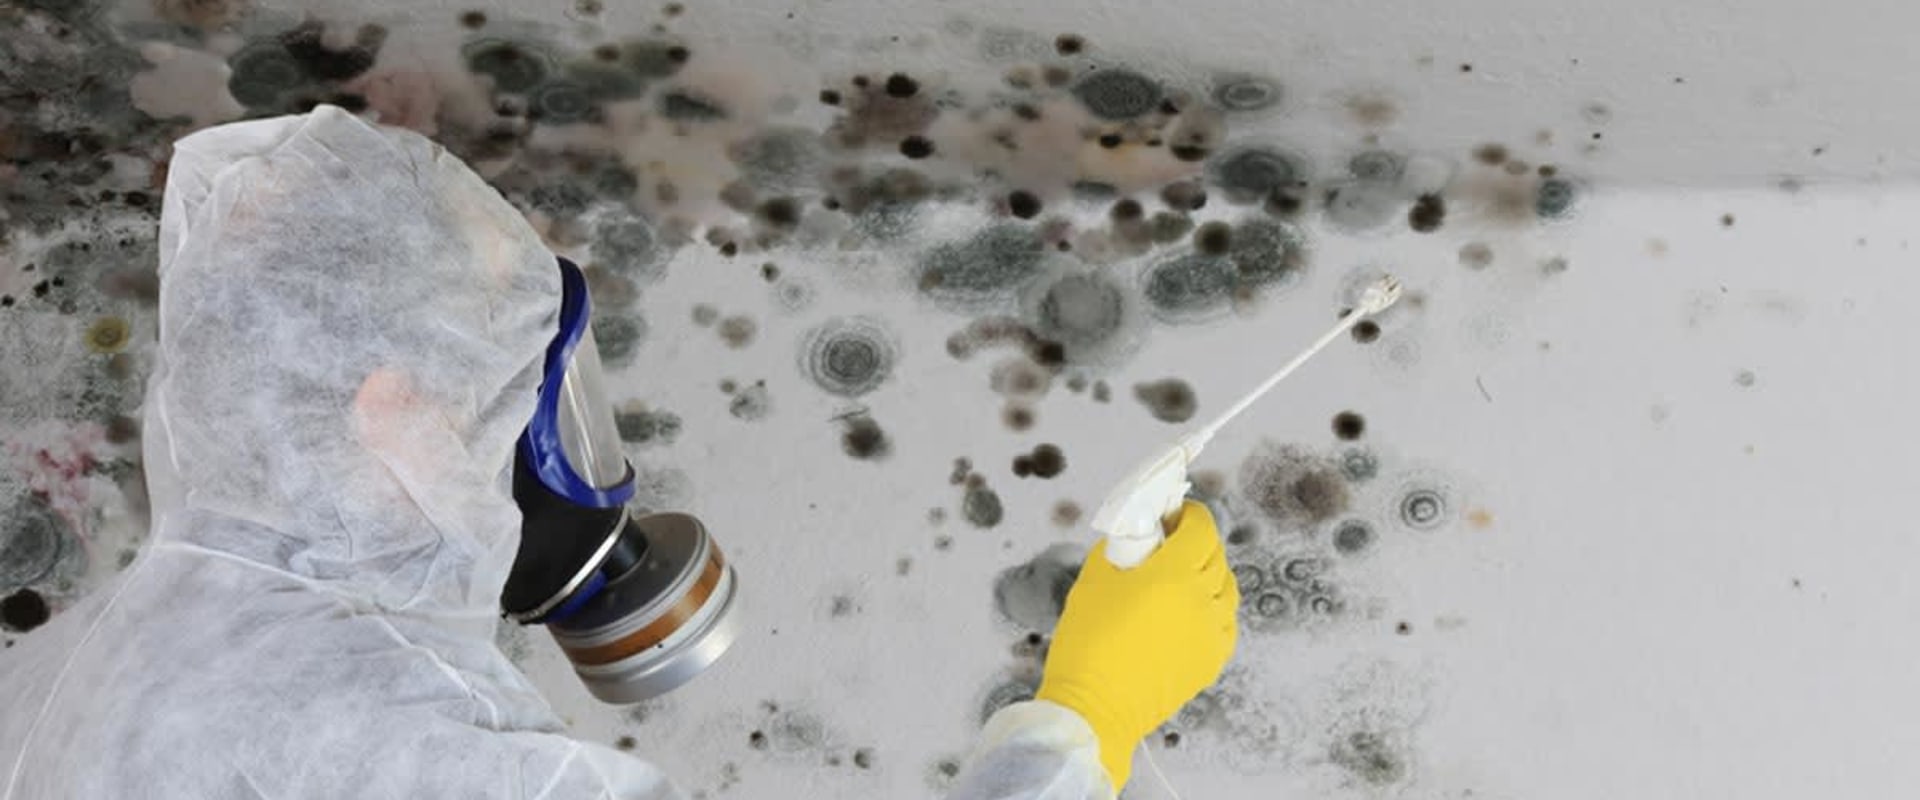 Do you need a license for mold remediation in georgia?